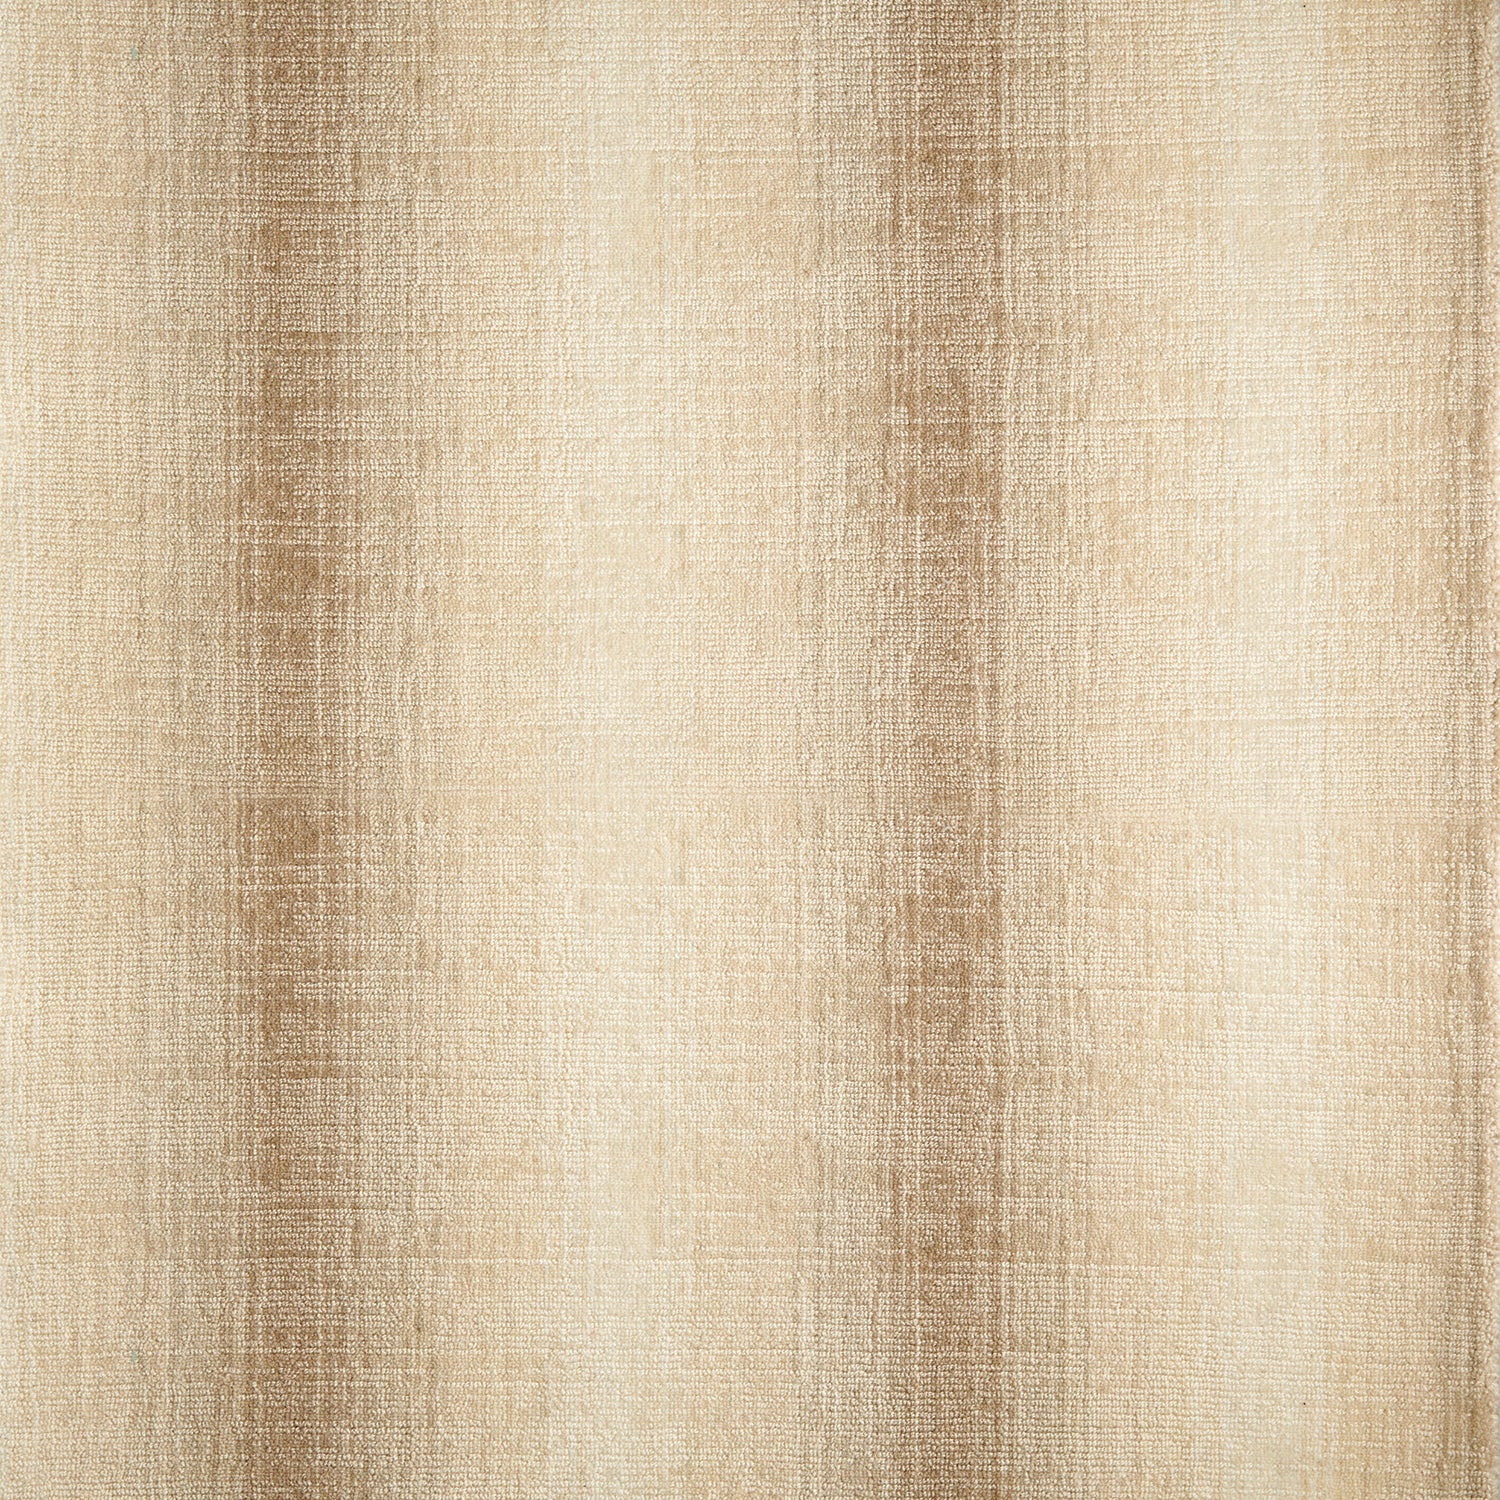 Wool-blend broadloom carpet swatch in an ombré stripe print in shades of cream, tan and brown.